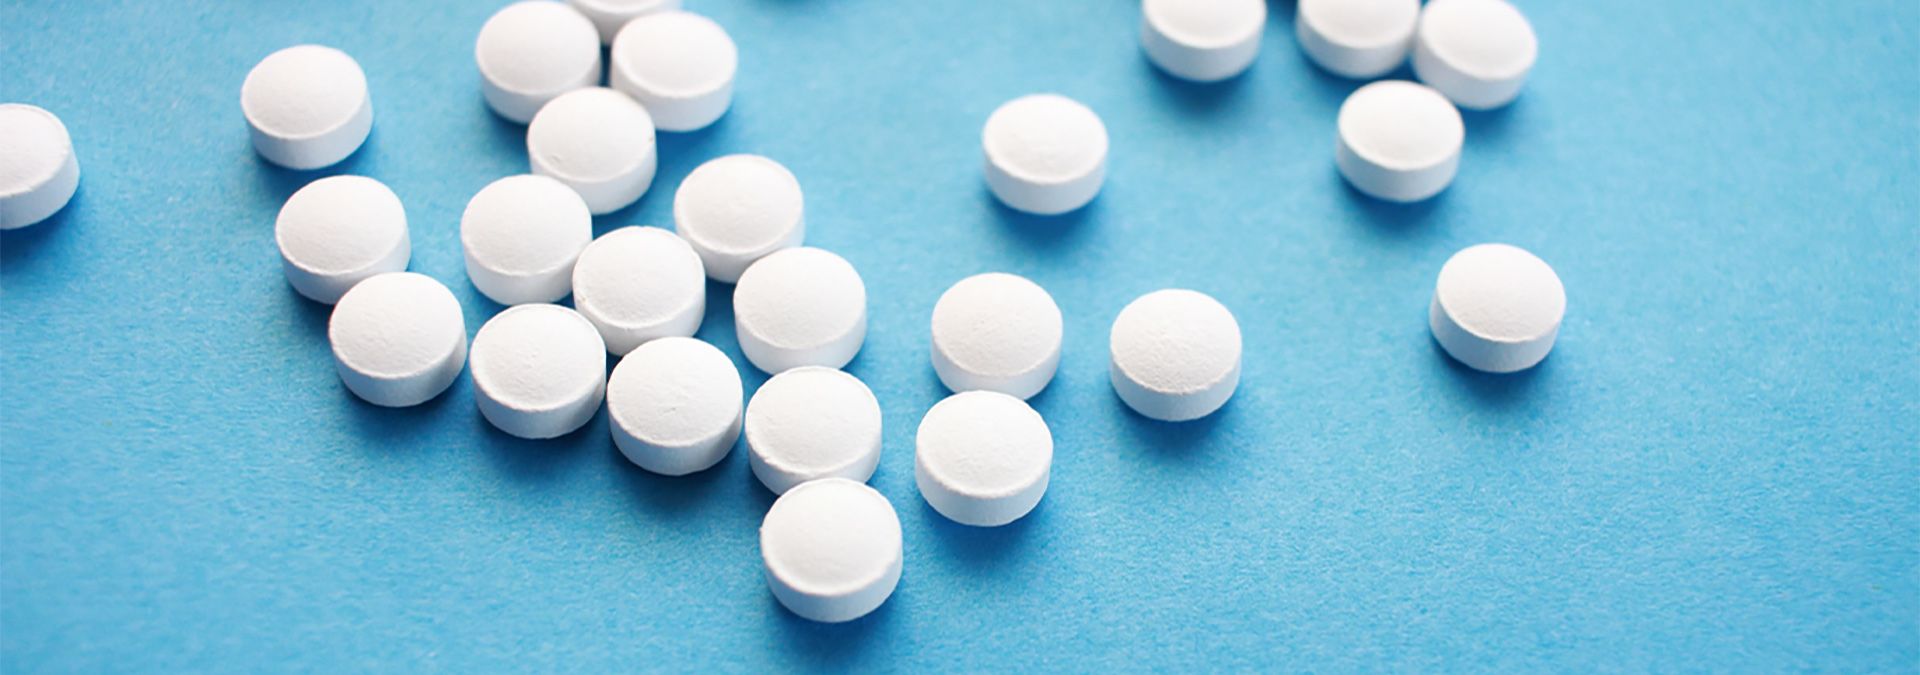 Close up photo of several white circular pills on a soft blue surface